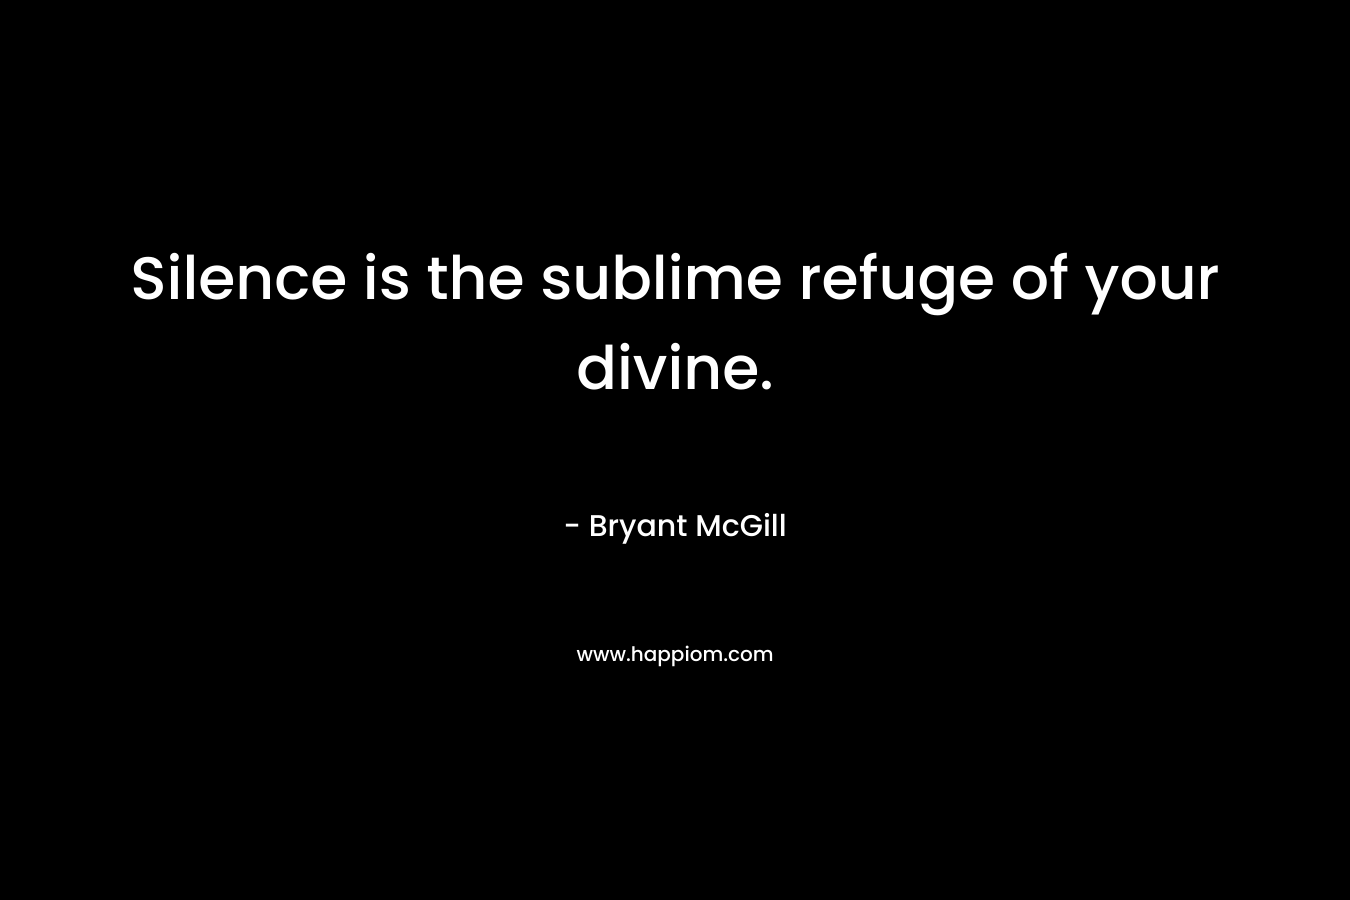 Silence is the sublime refuge of your divine.